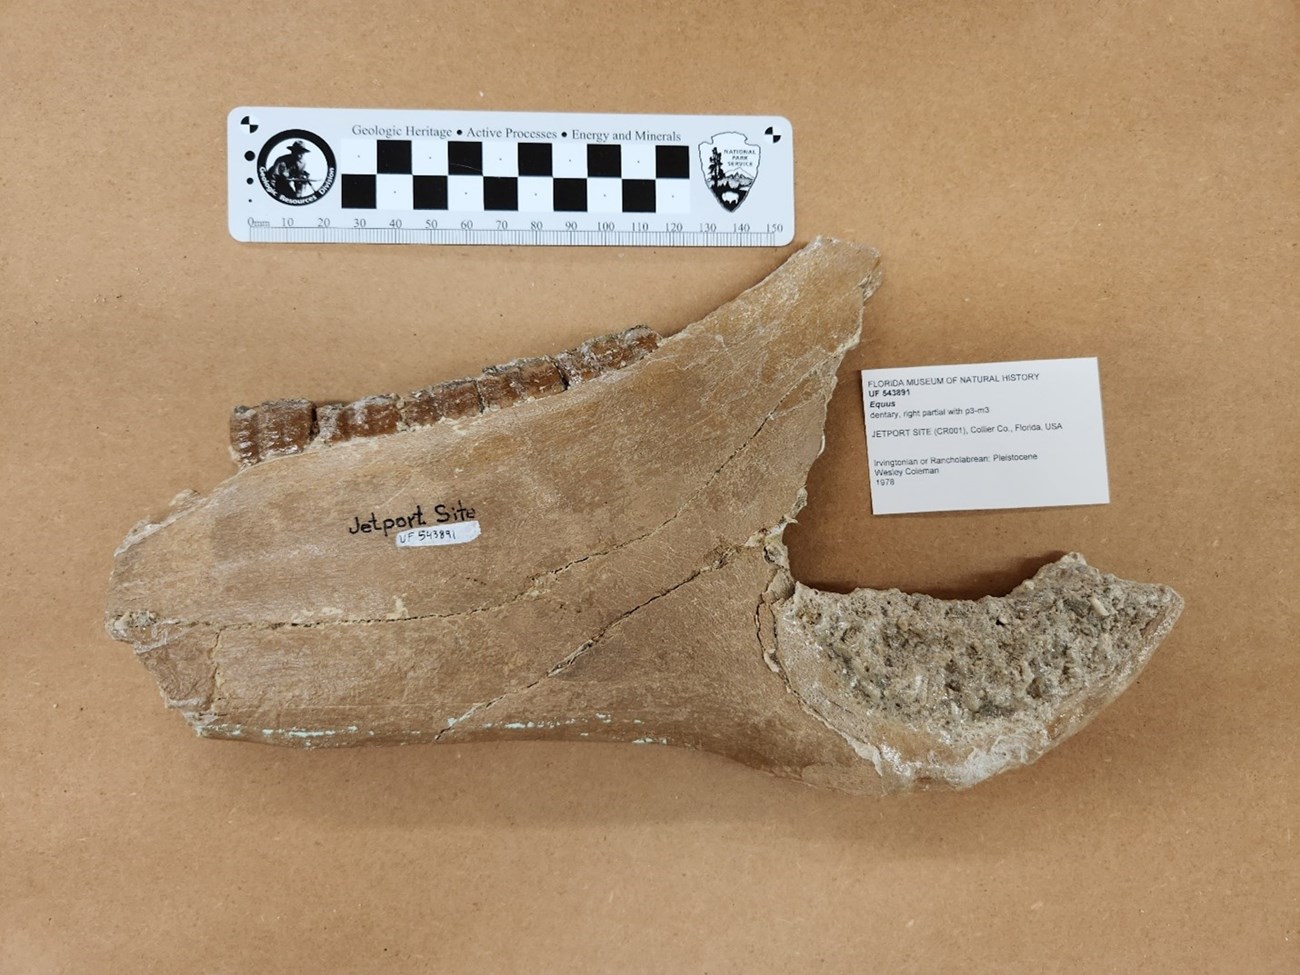 Photo of a fossil jaw bone with a ruler for scale.